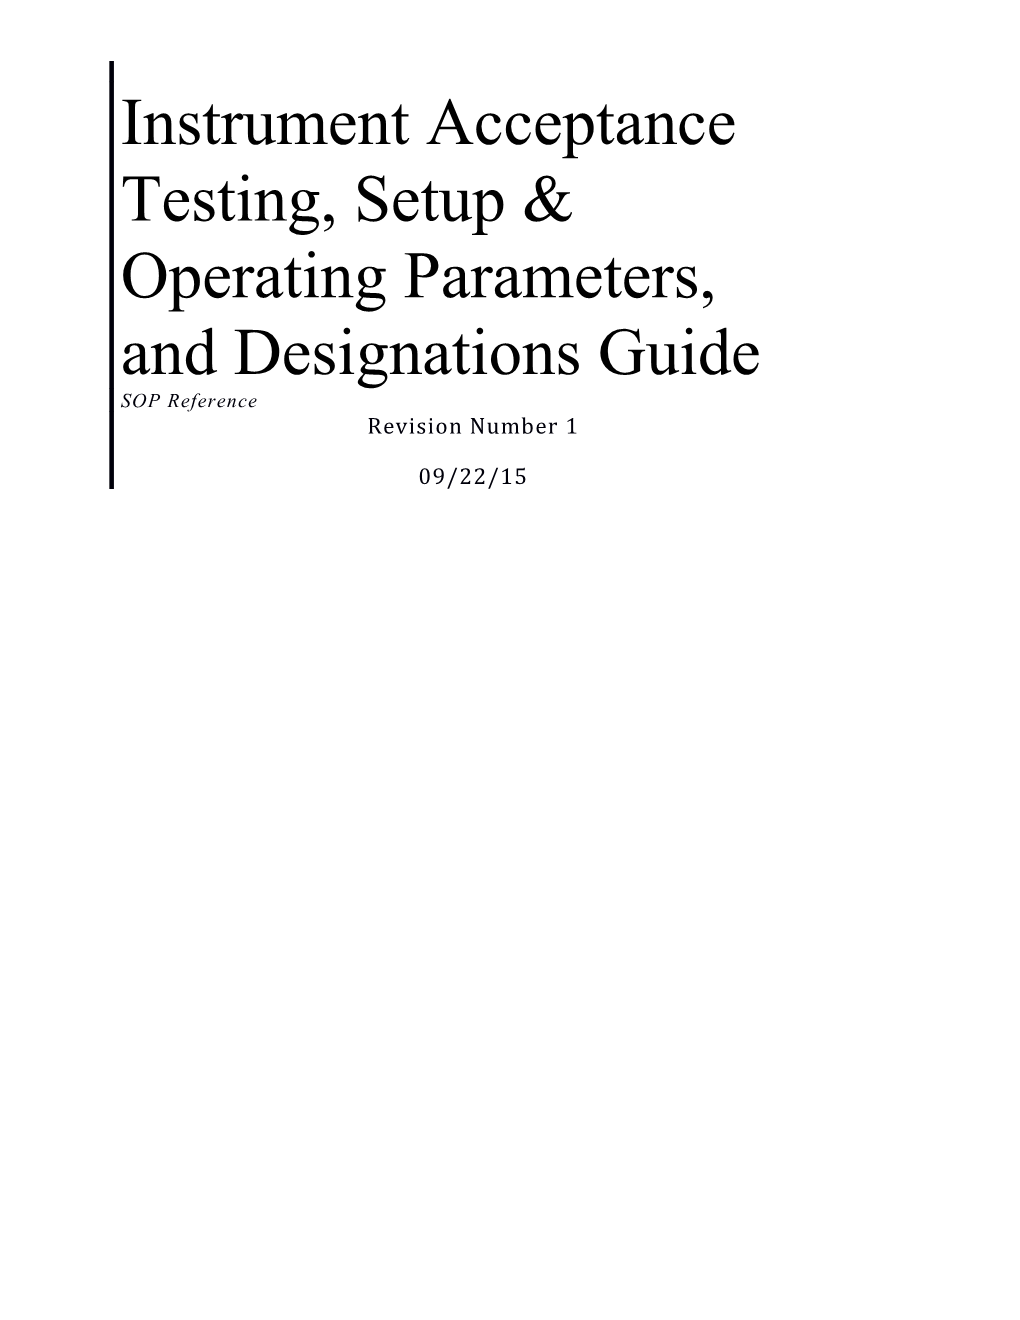 Instrument Acceptance Testing, Setup & Operating Parameters, and Designations Guide